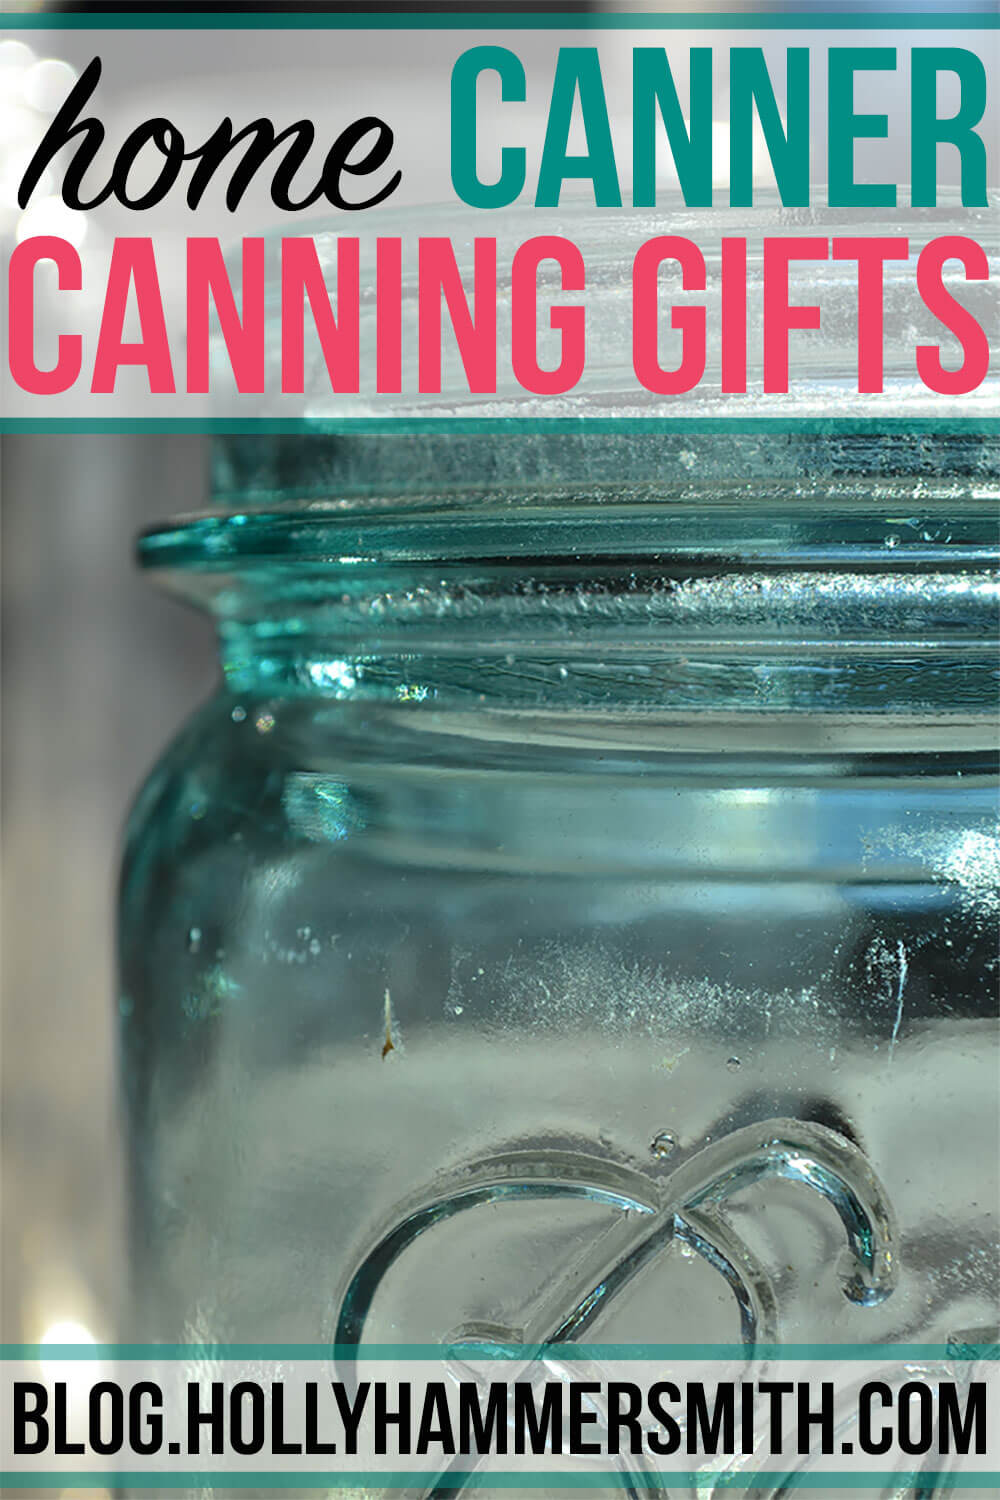 Home Canning Gifts